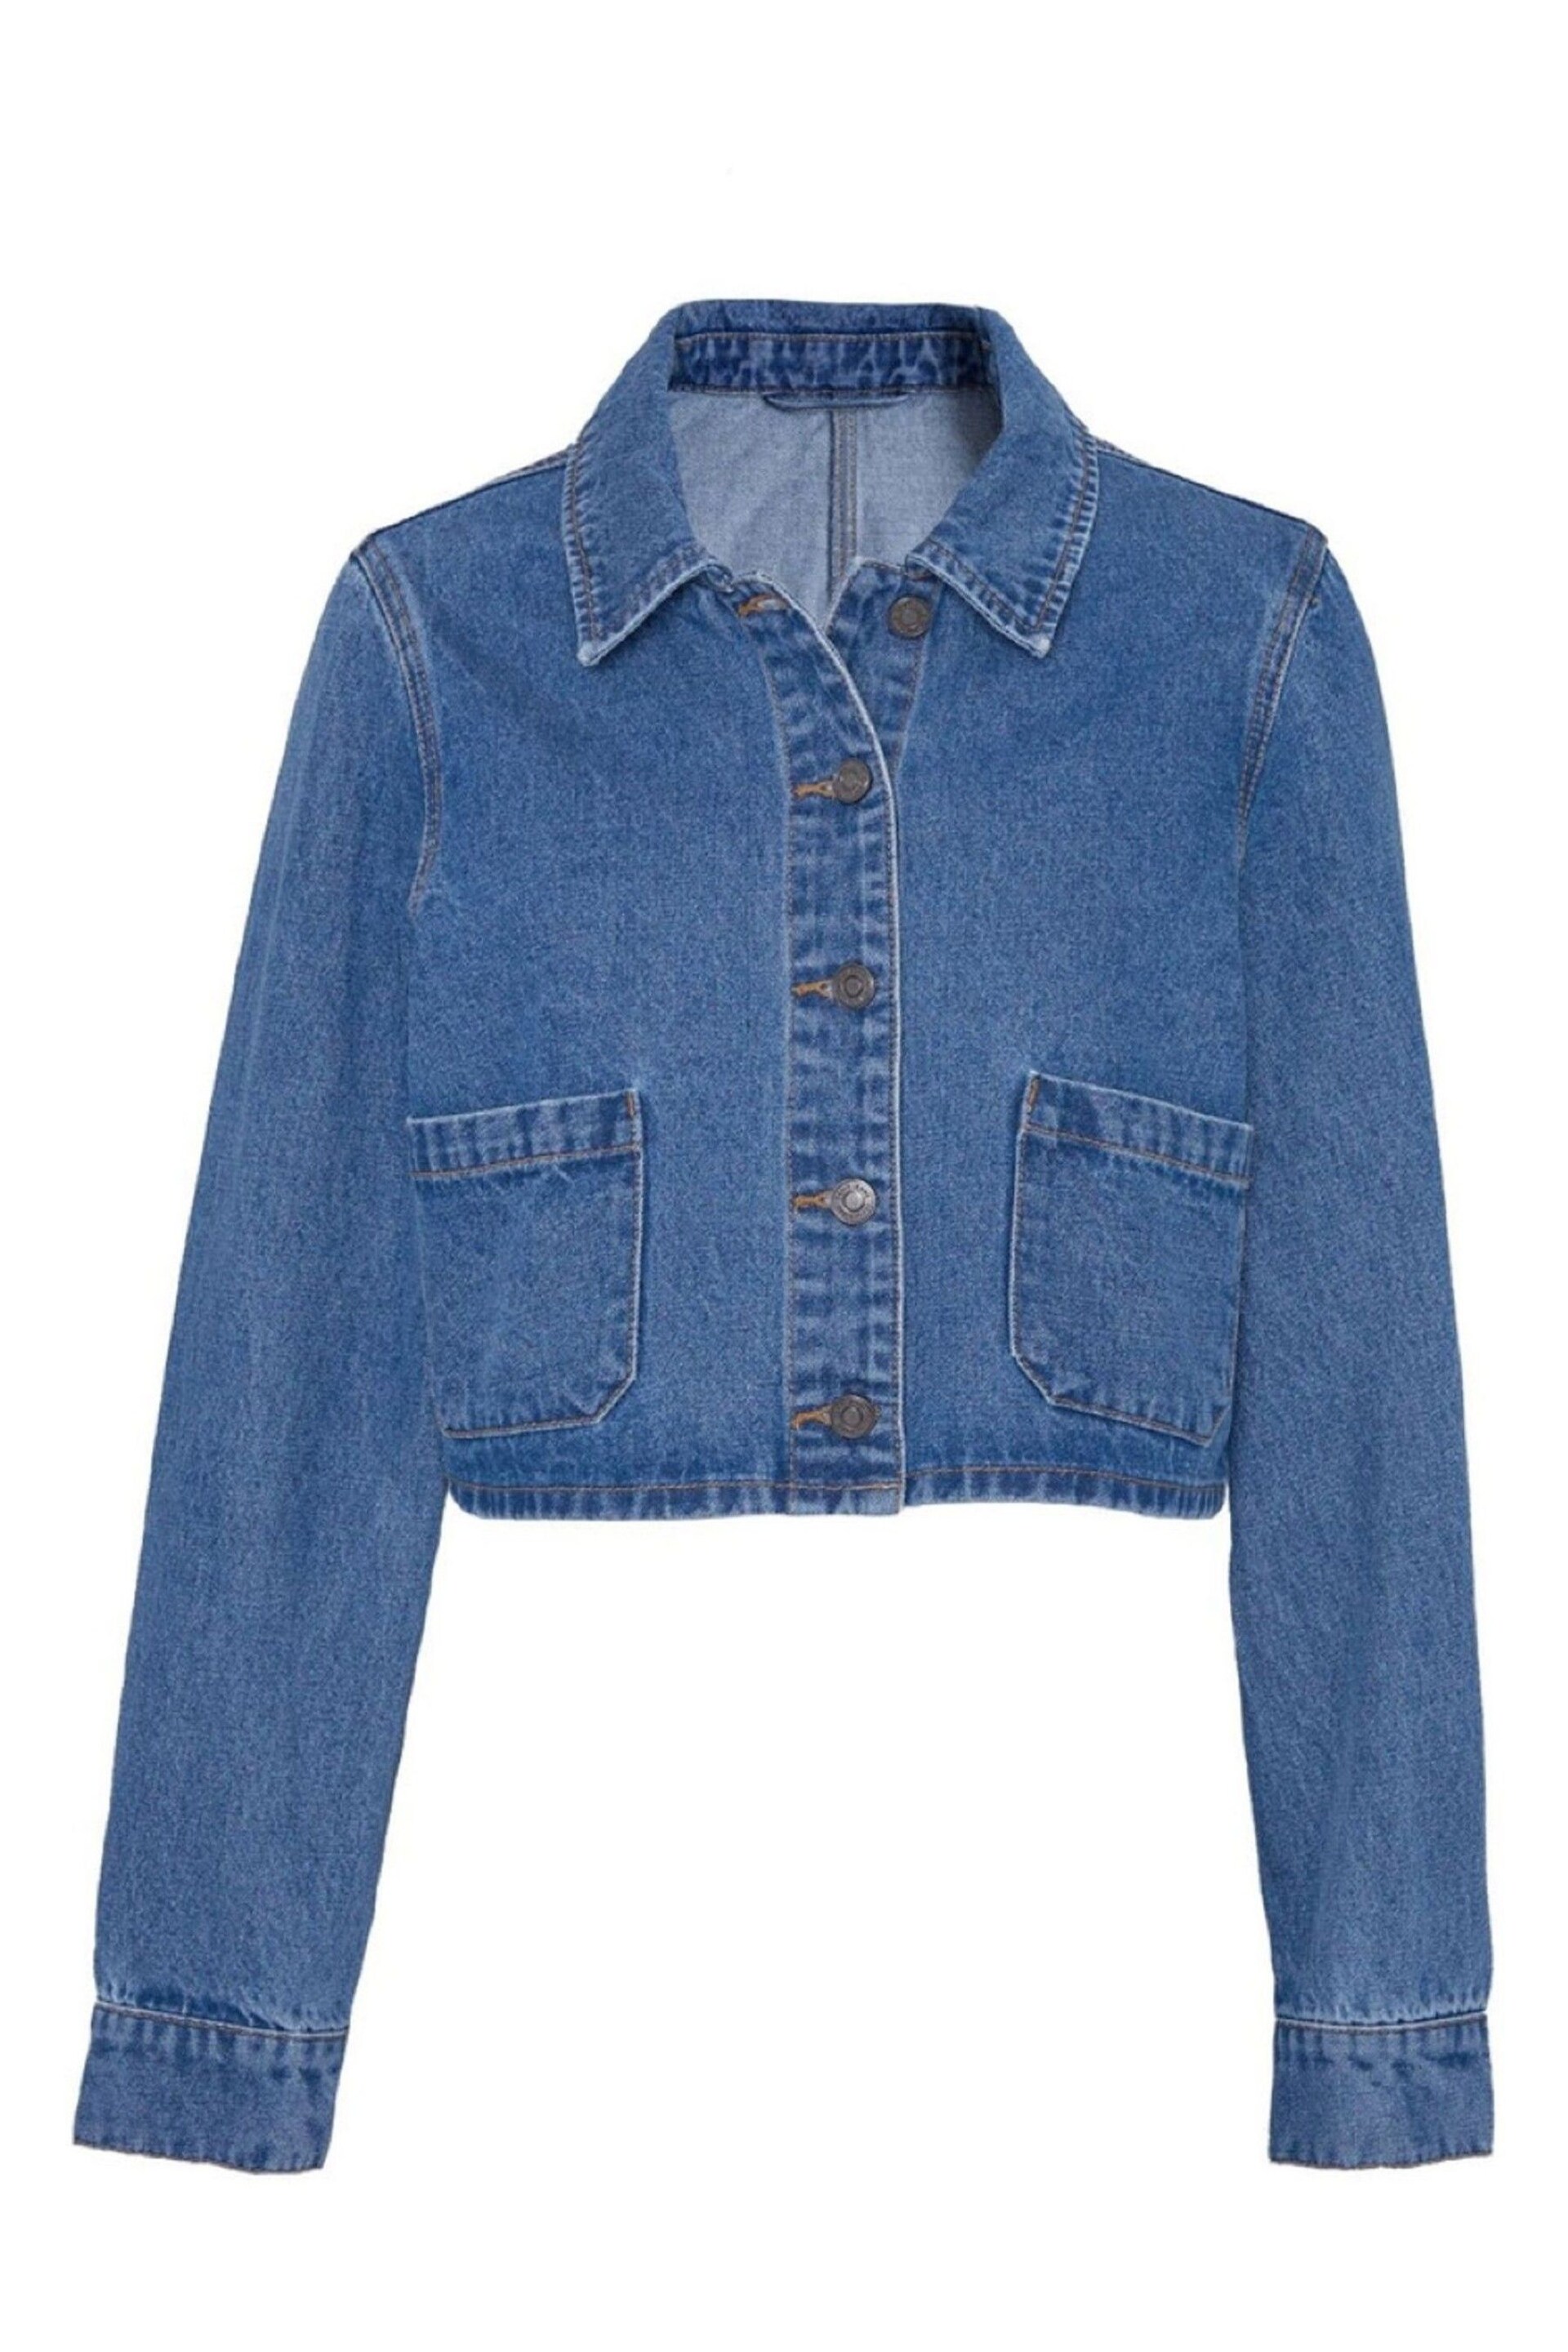 Another Sunday Blue Button Through Cropped Denim Jacket - Image 4 of 6